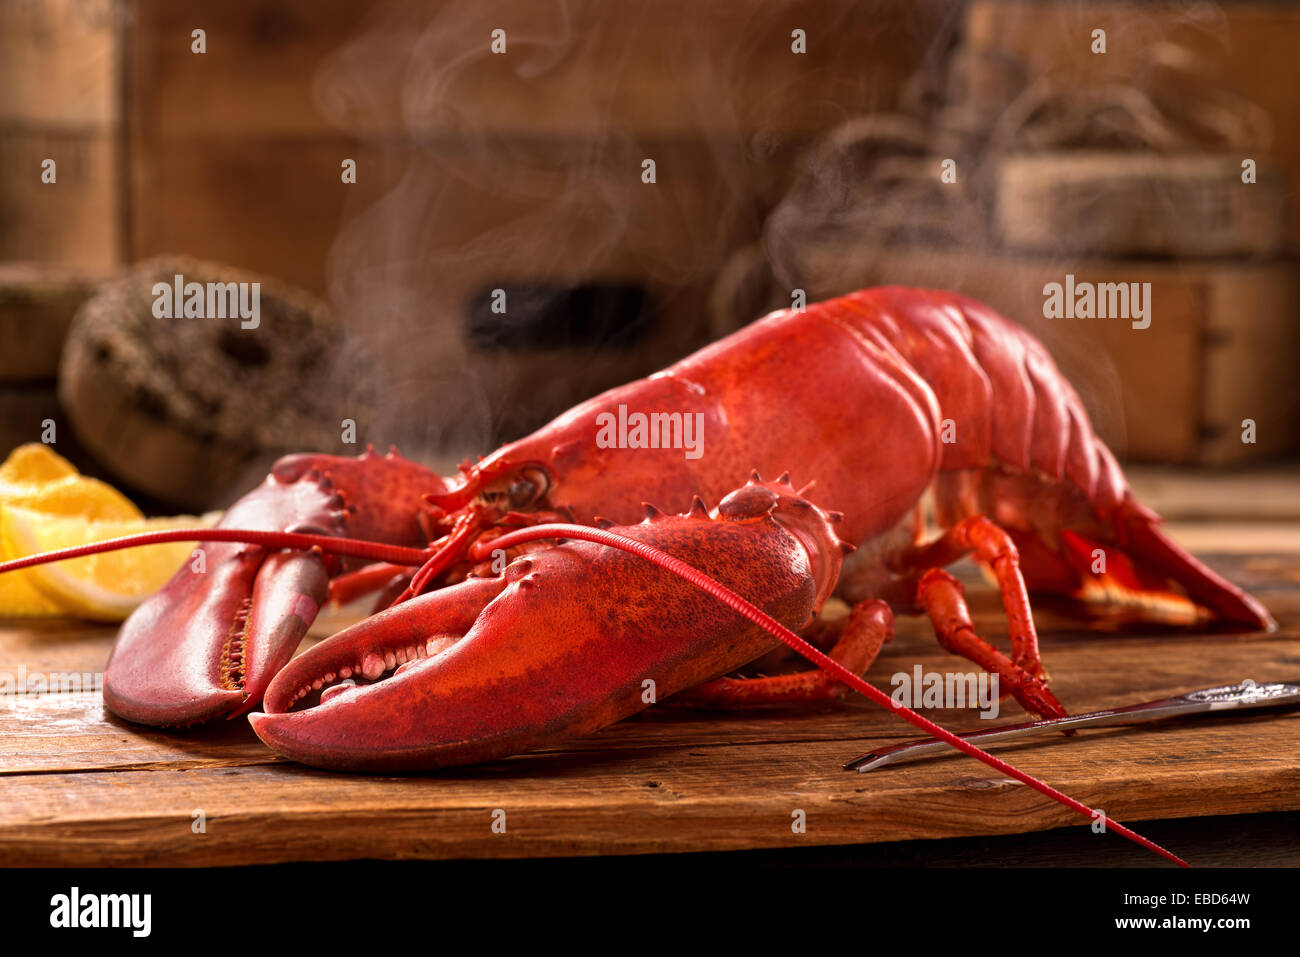 A delicious freshly steamed lobster in the rough. Stock Photo